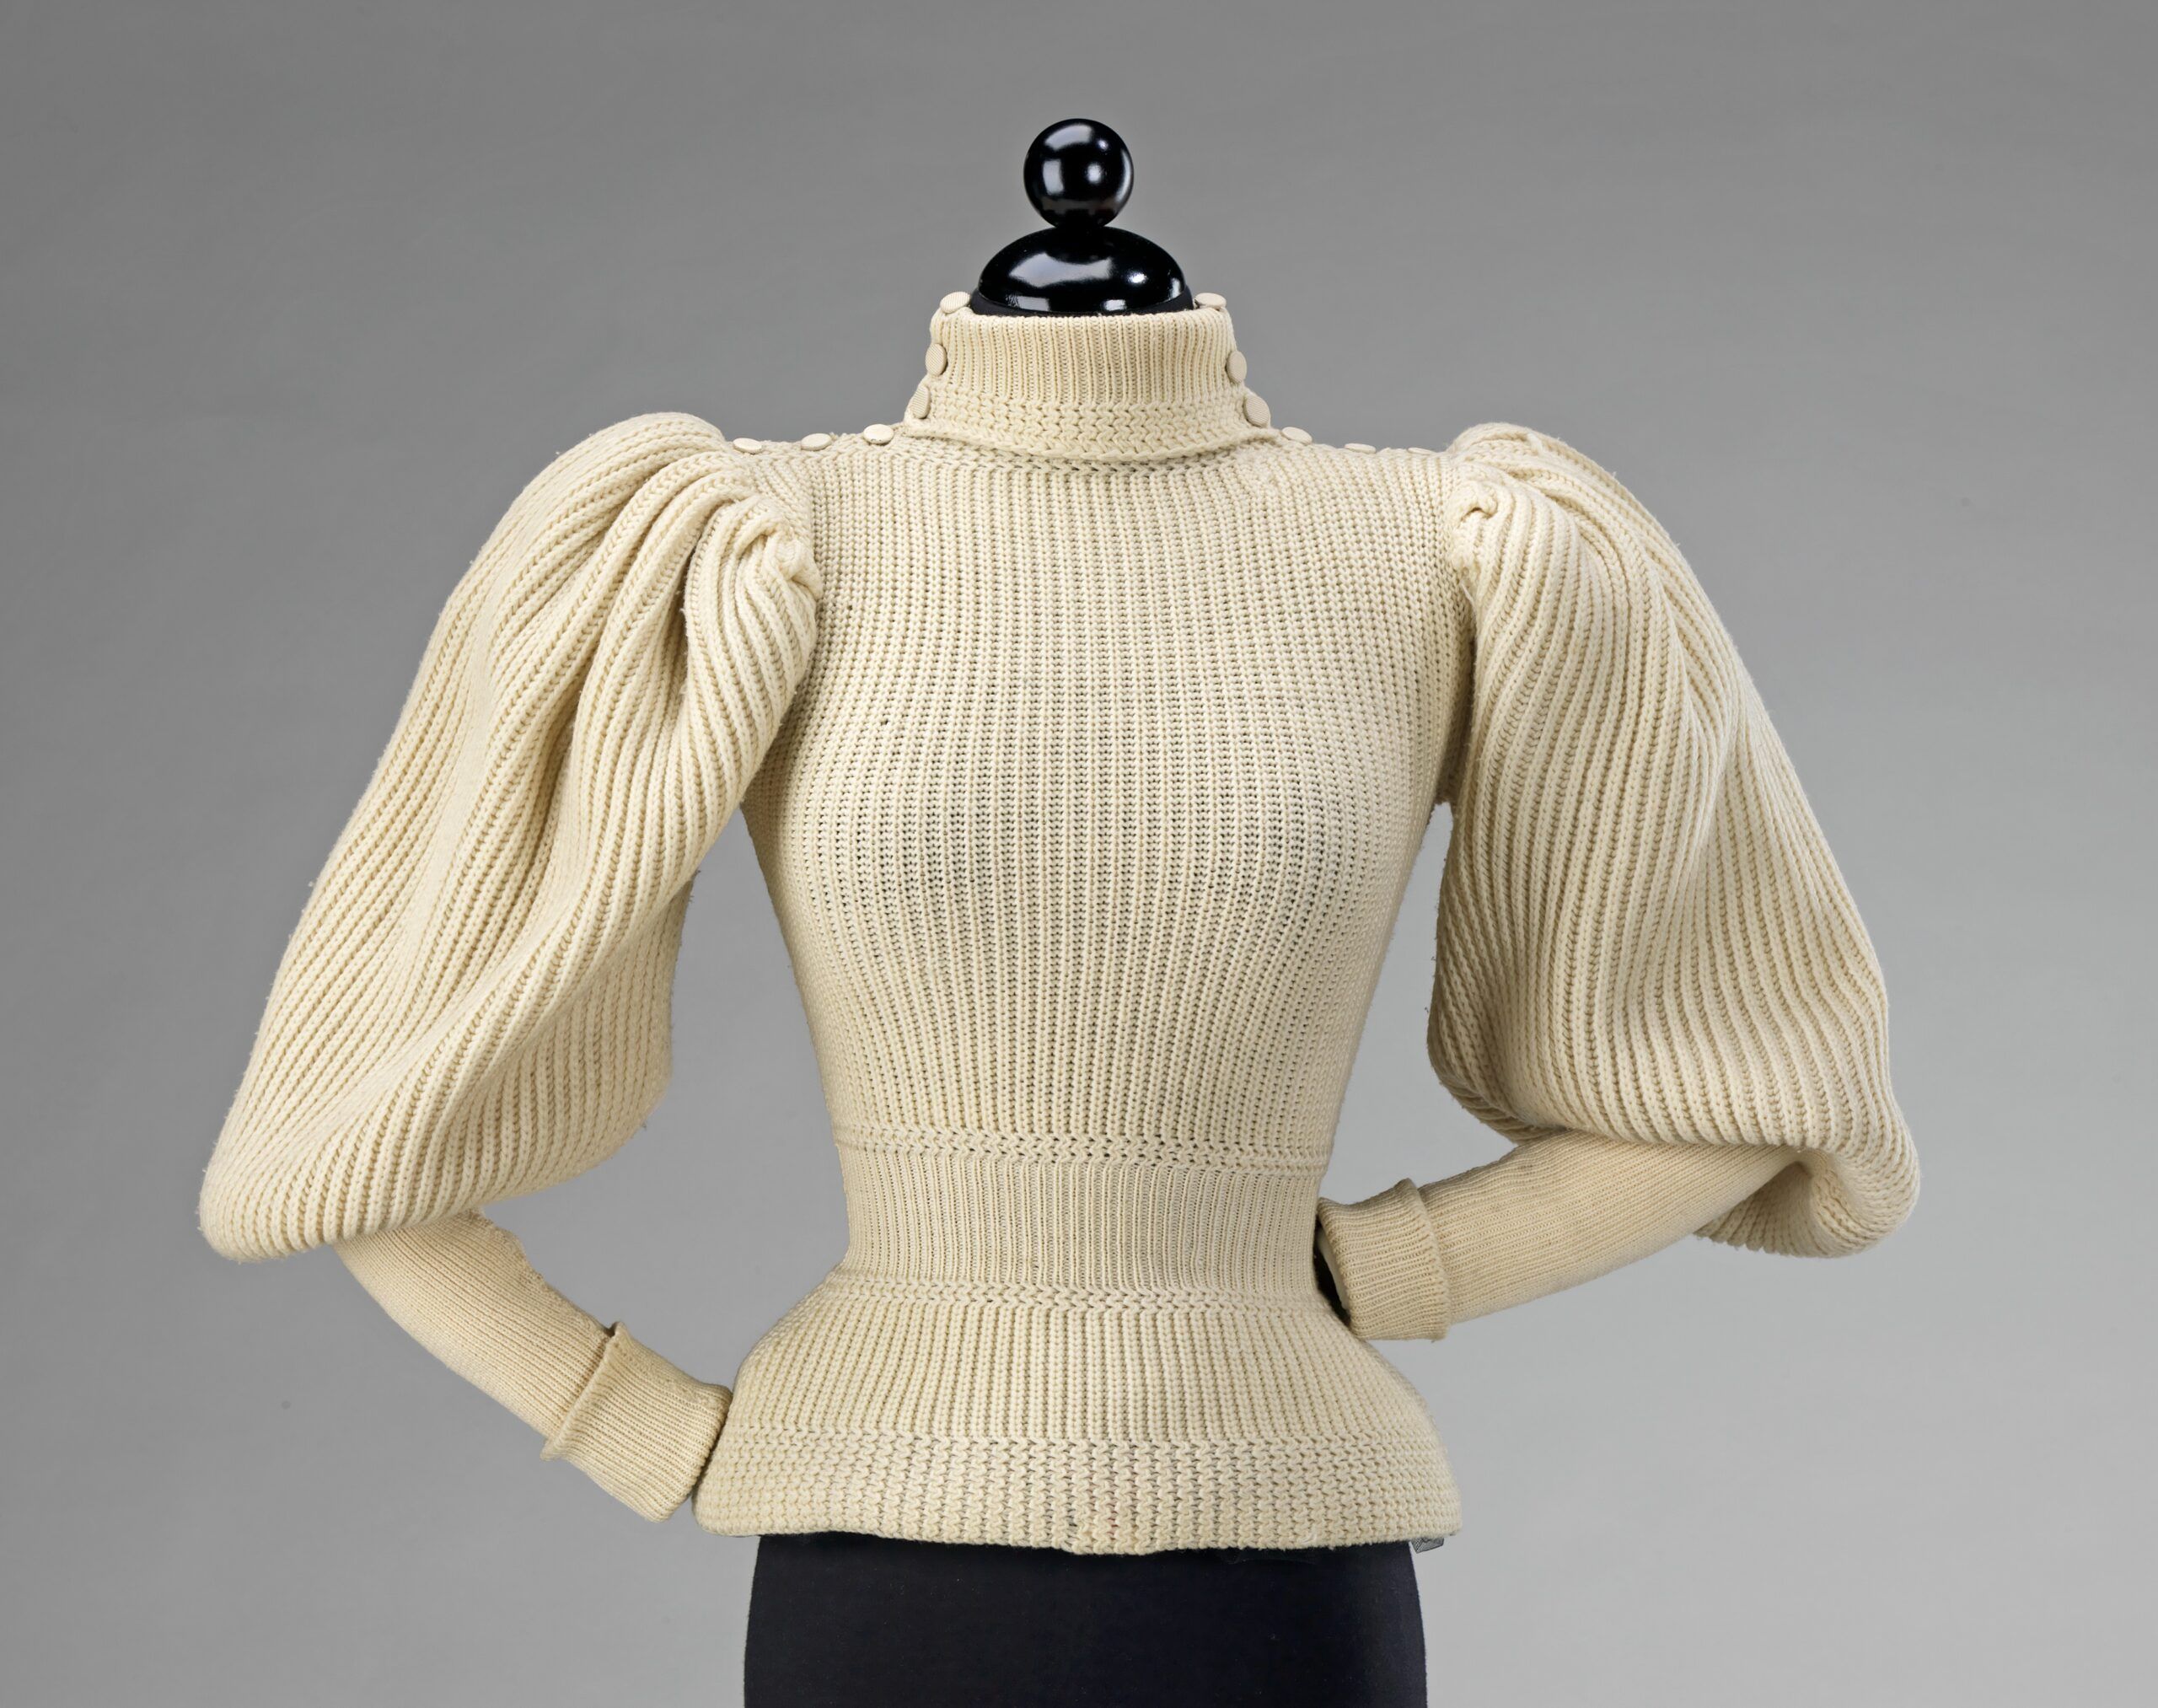 The Fashion Statement of the 19th Century: Exploring the Charm and Style of 19th Century Sweaters